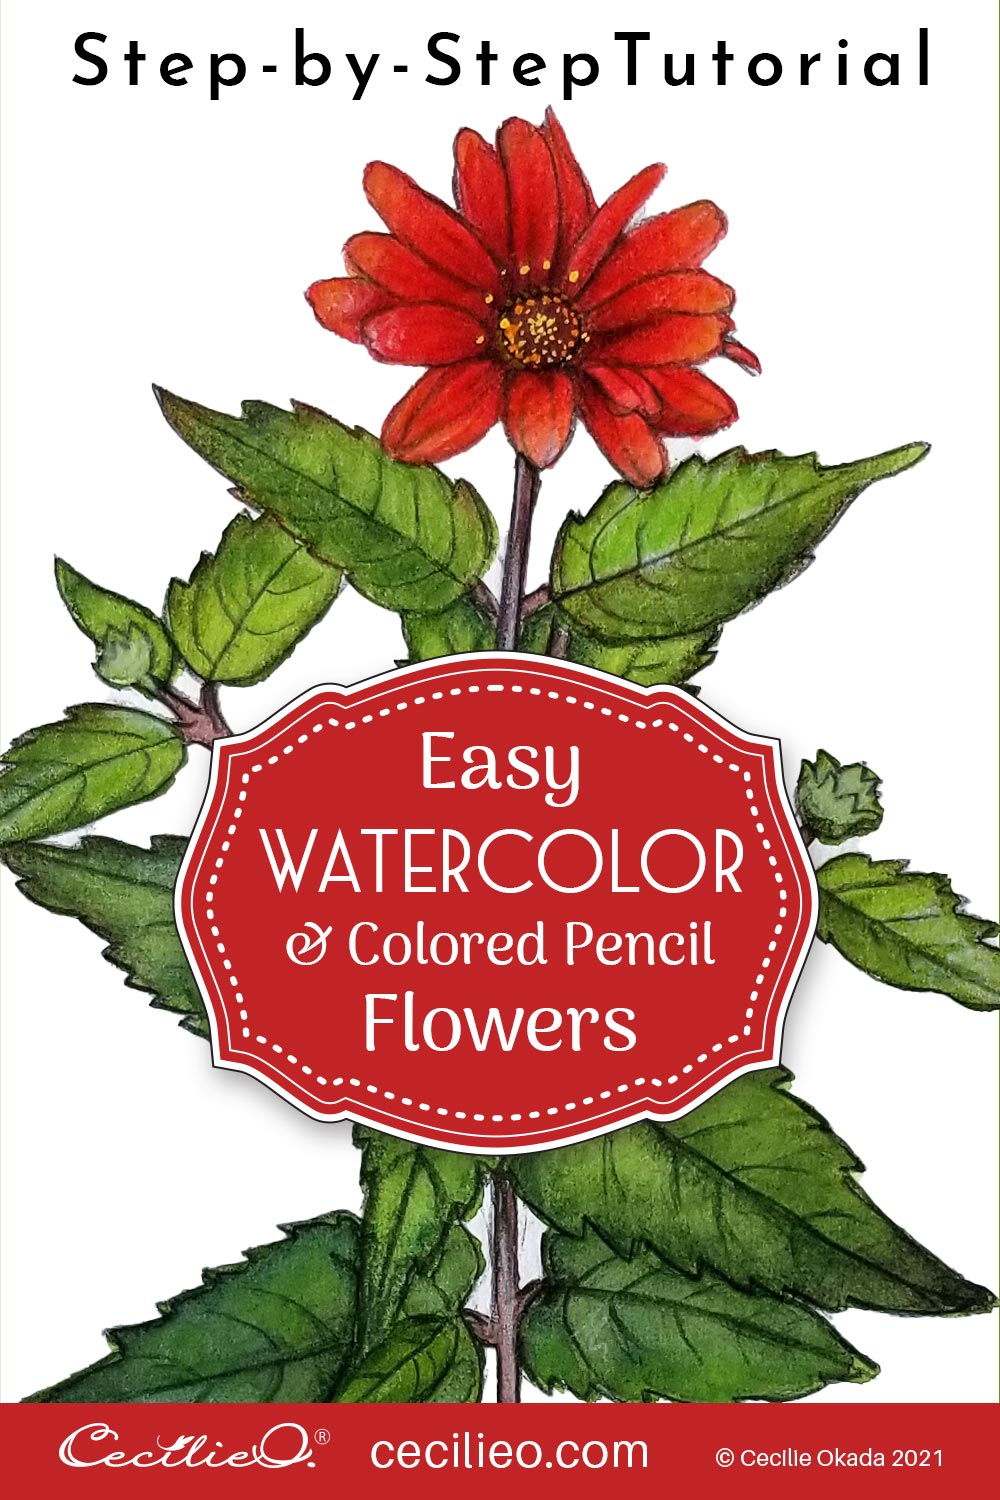 https://cecilieo.com/wp-content/uploads/2021/08/14_mexican-sunflower_watercolor_tutorial_ceciilieo.jpg